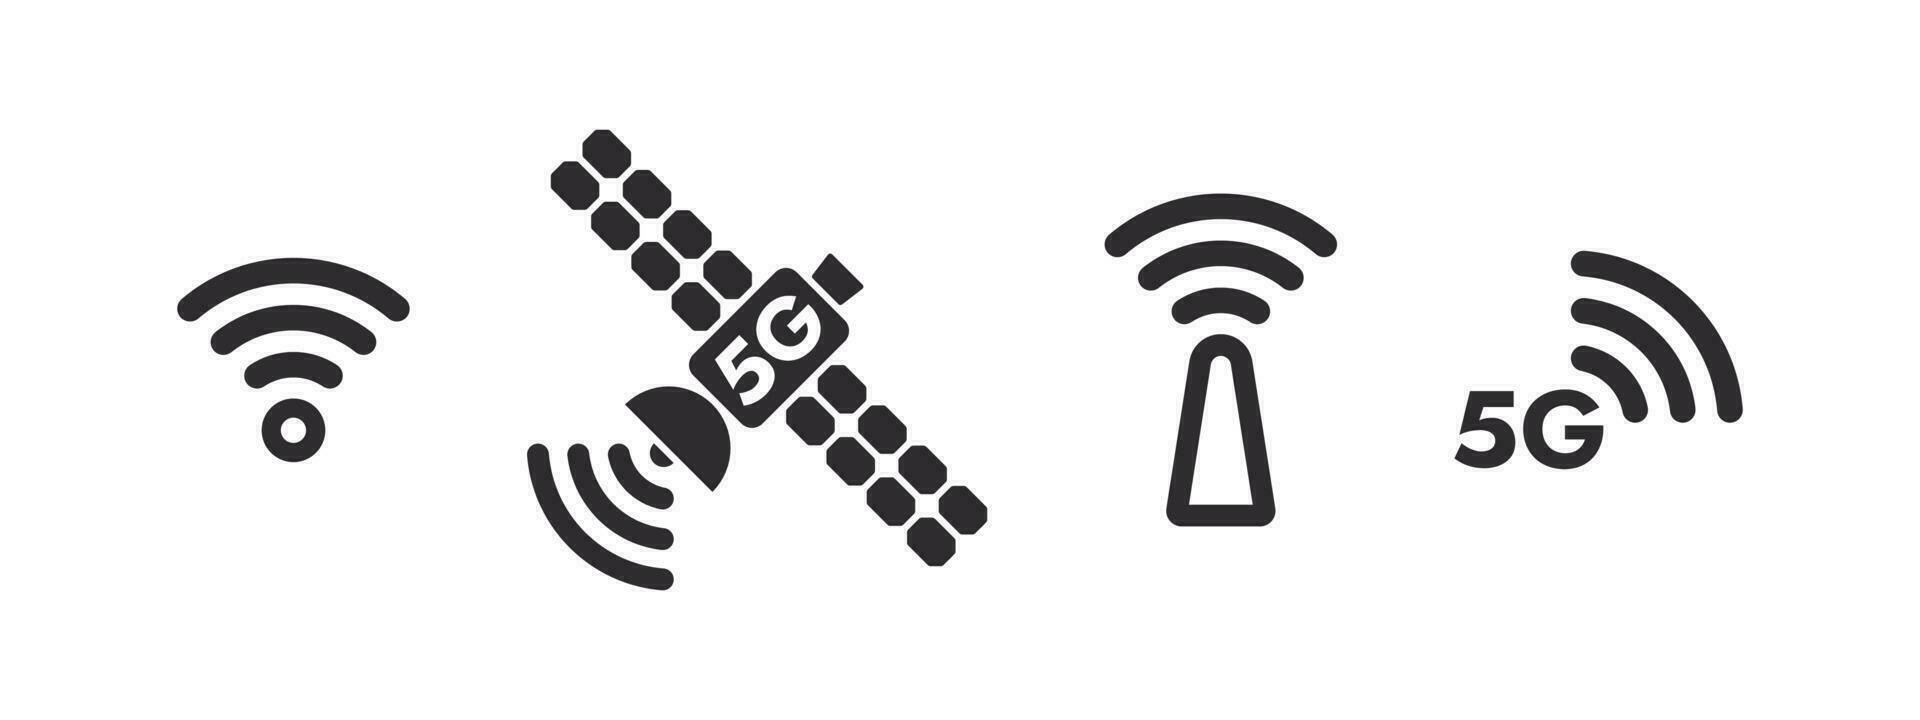 Satellite icons. 5G Satellite Internet. 5G Wireless web. Wireless connectivity. Vector scalable graphics